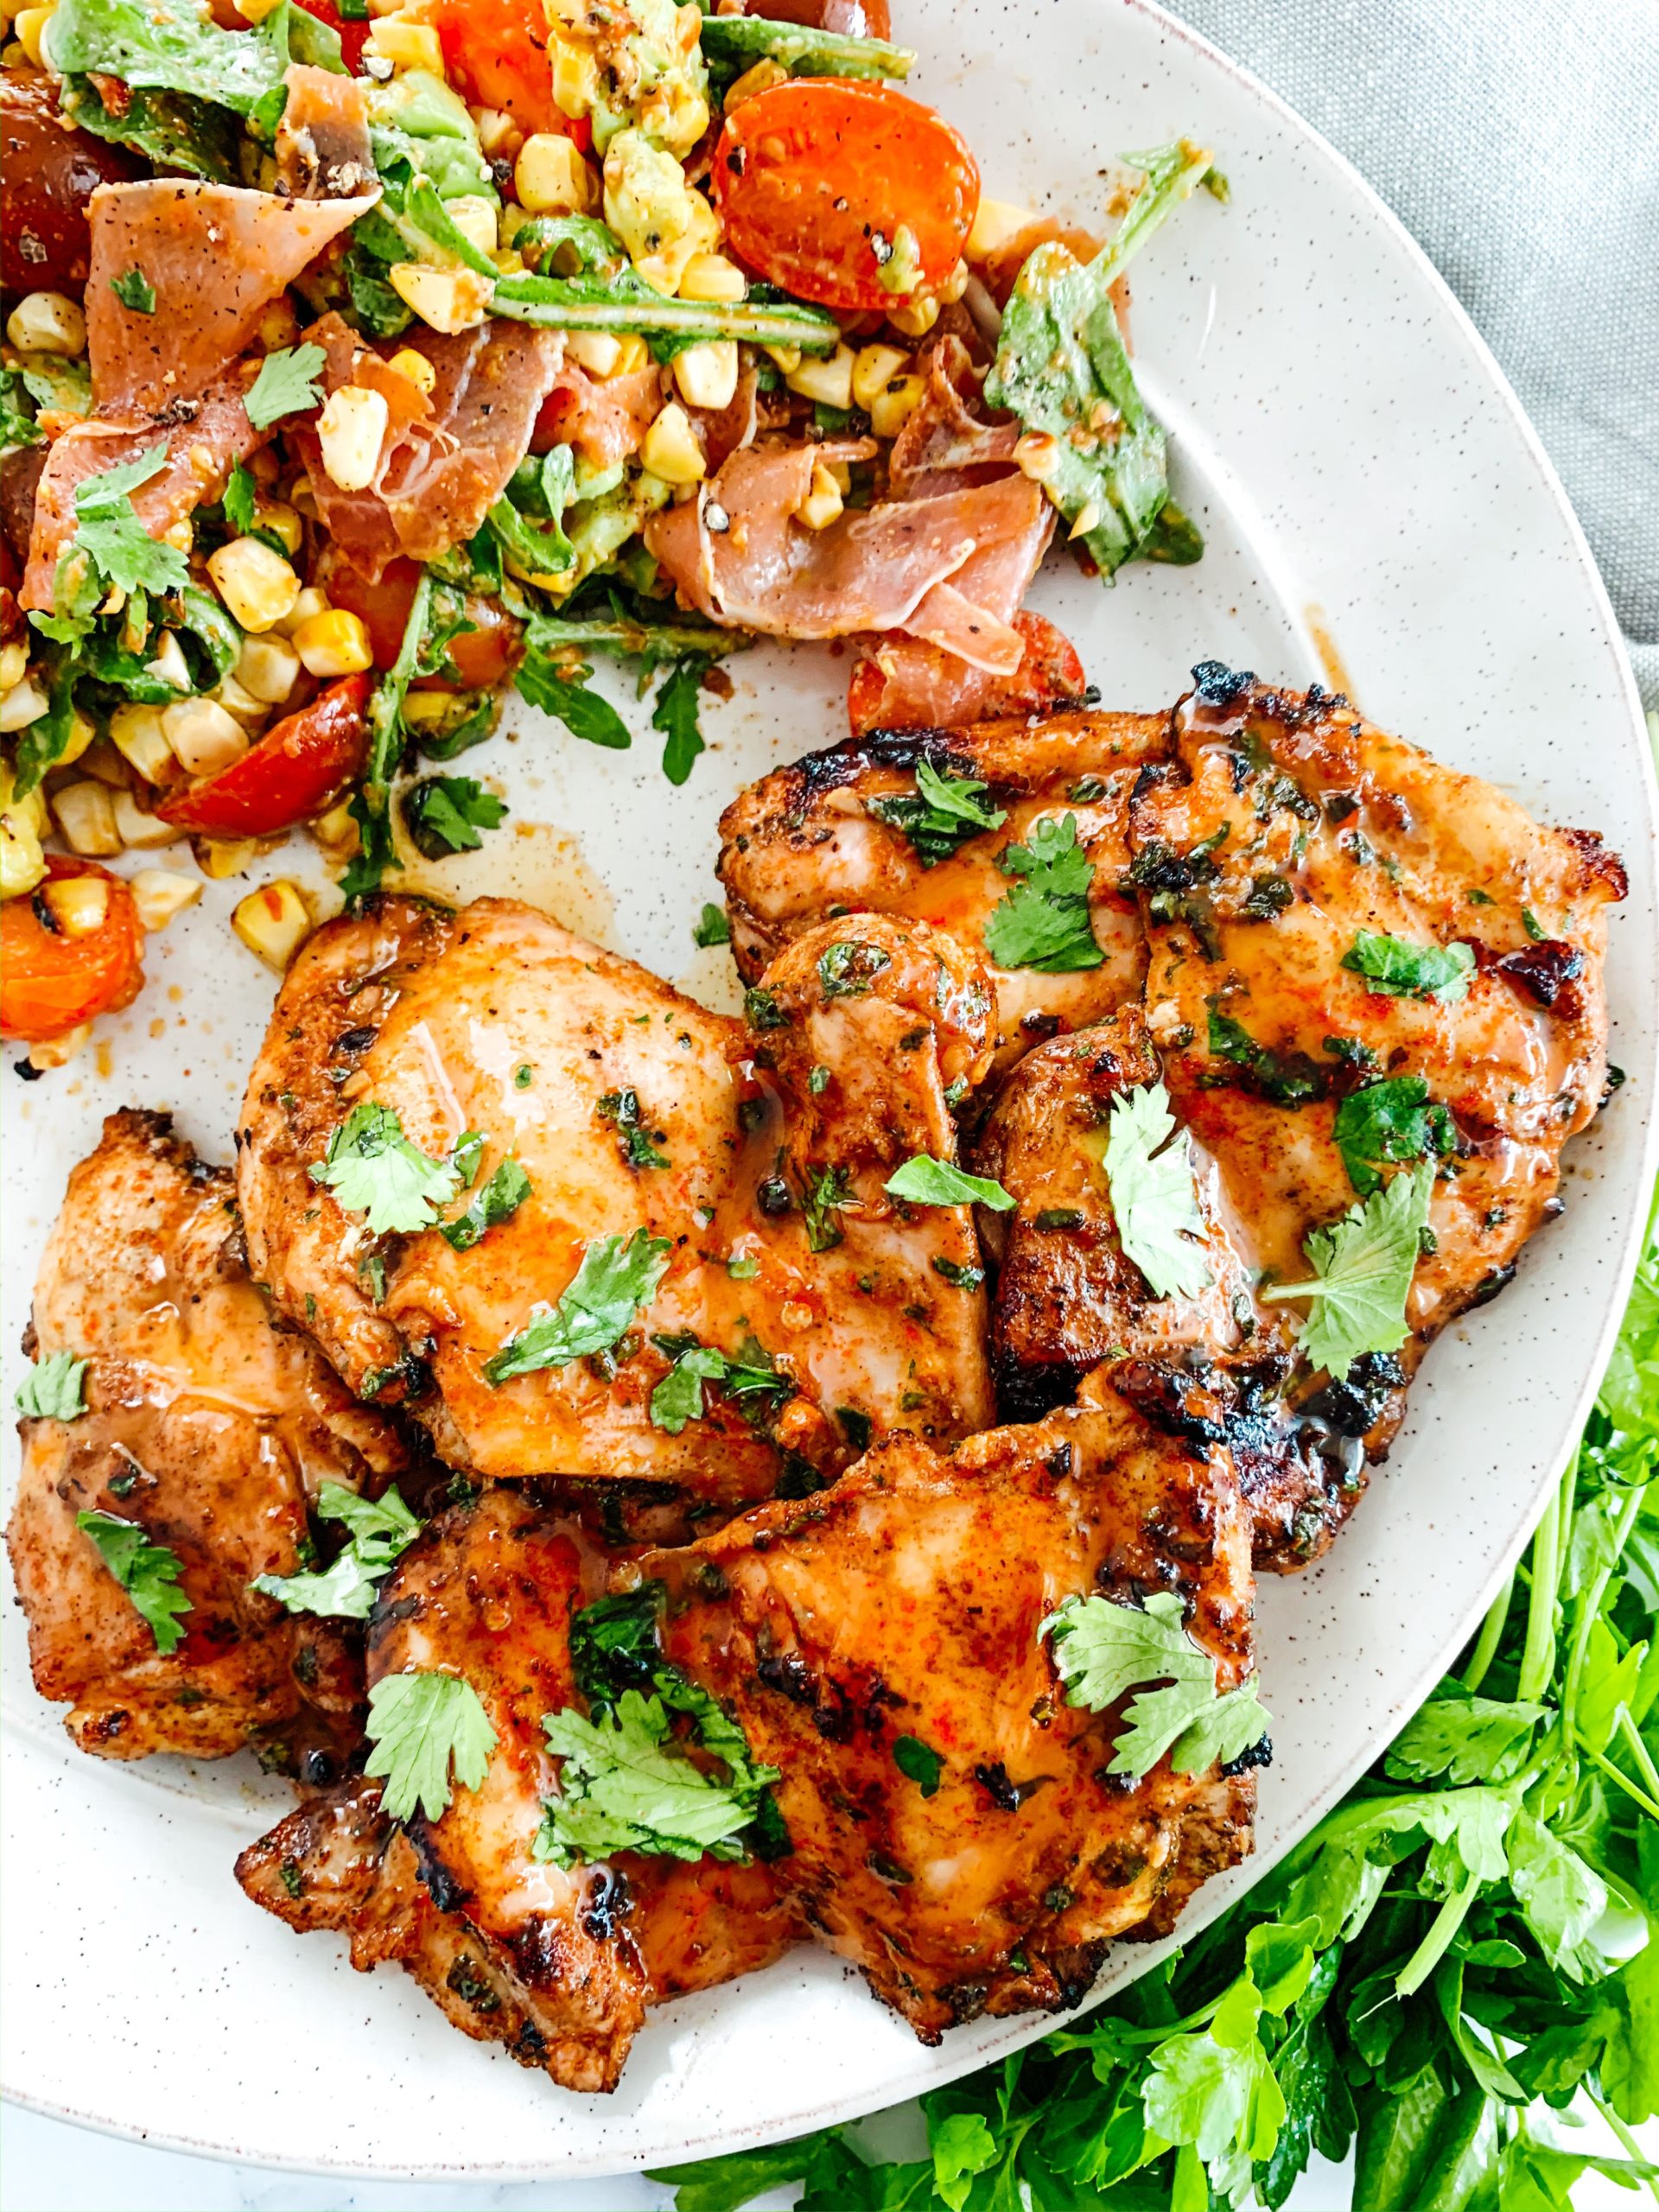 http://thecommunalfeast.com/wp-content/uploads/2020/06/grilled-chicken-thighs-5-scaled.jpg